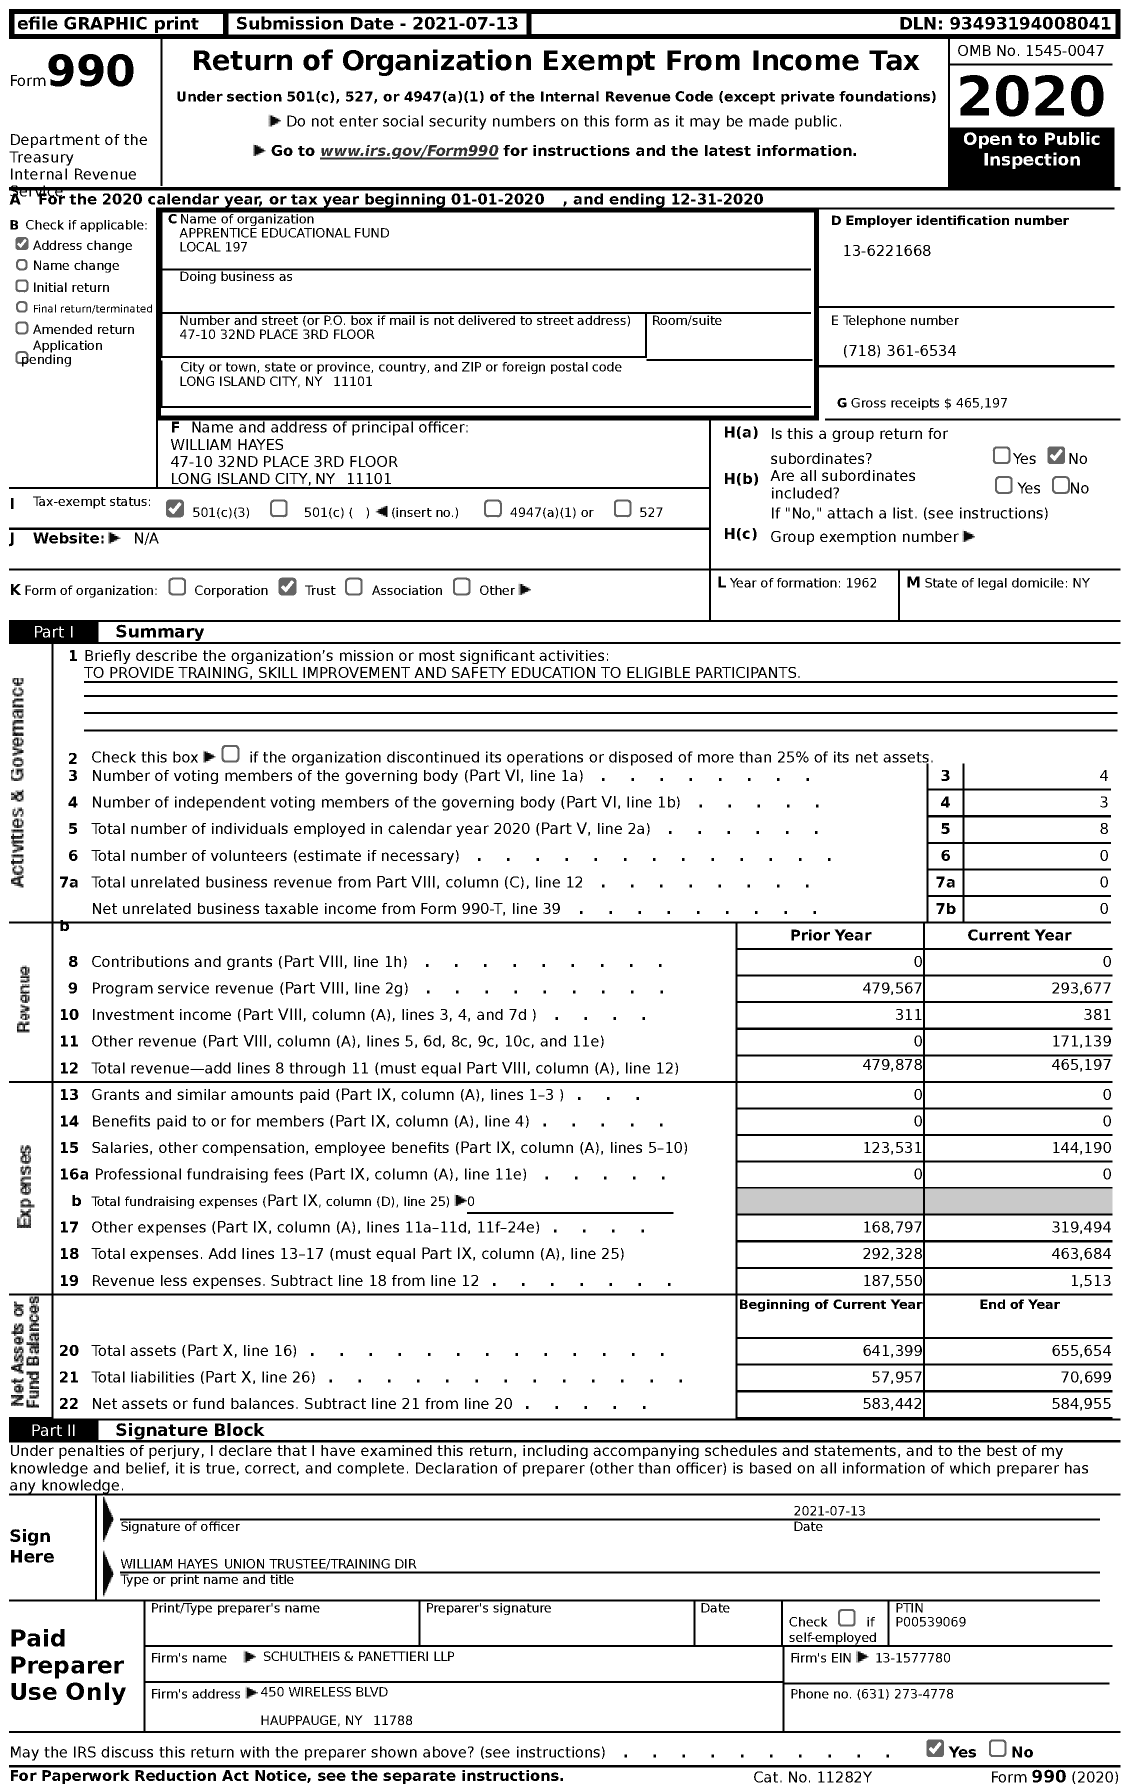 Image of first page of 2020 Form 990 for Apprentice Educational Fund Local 197